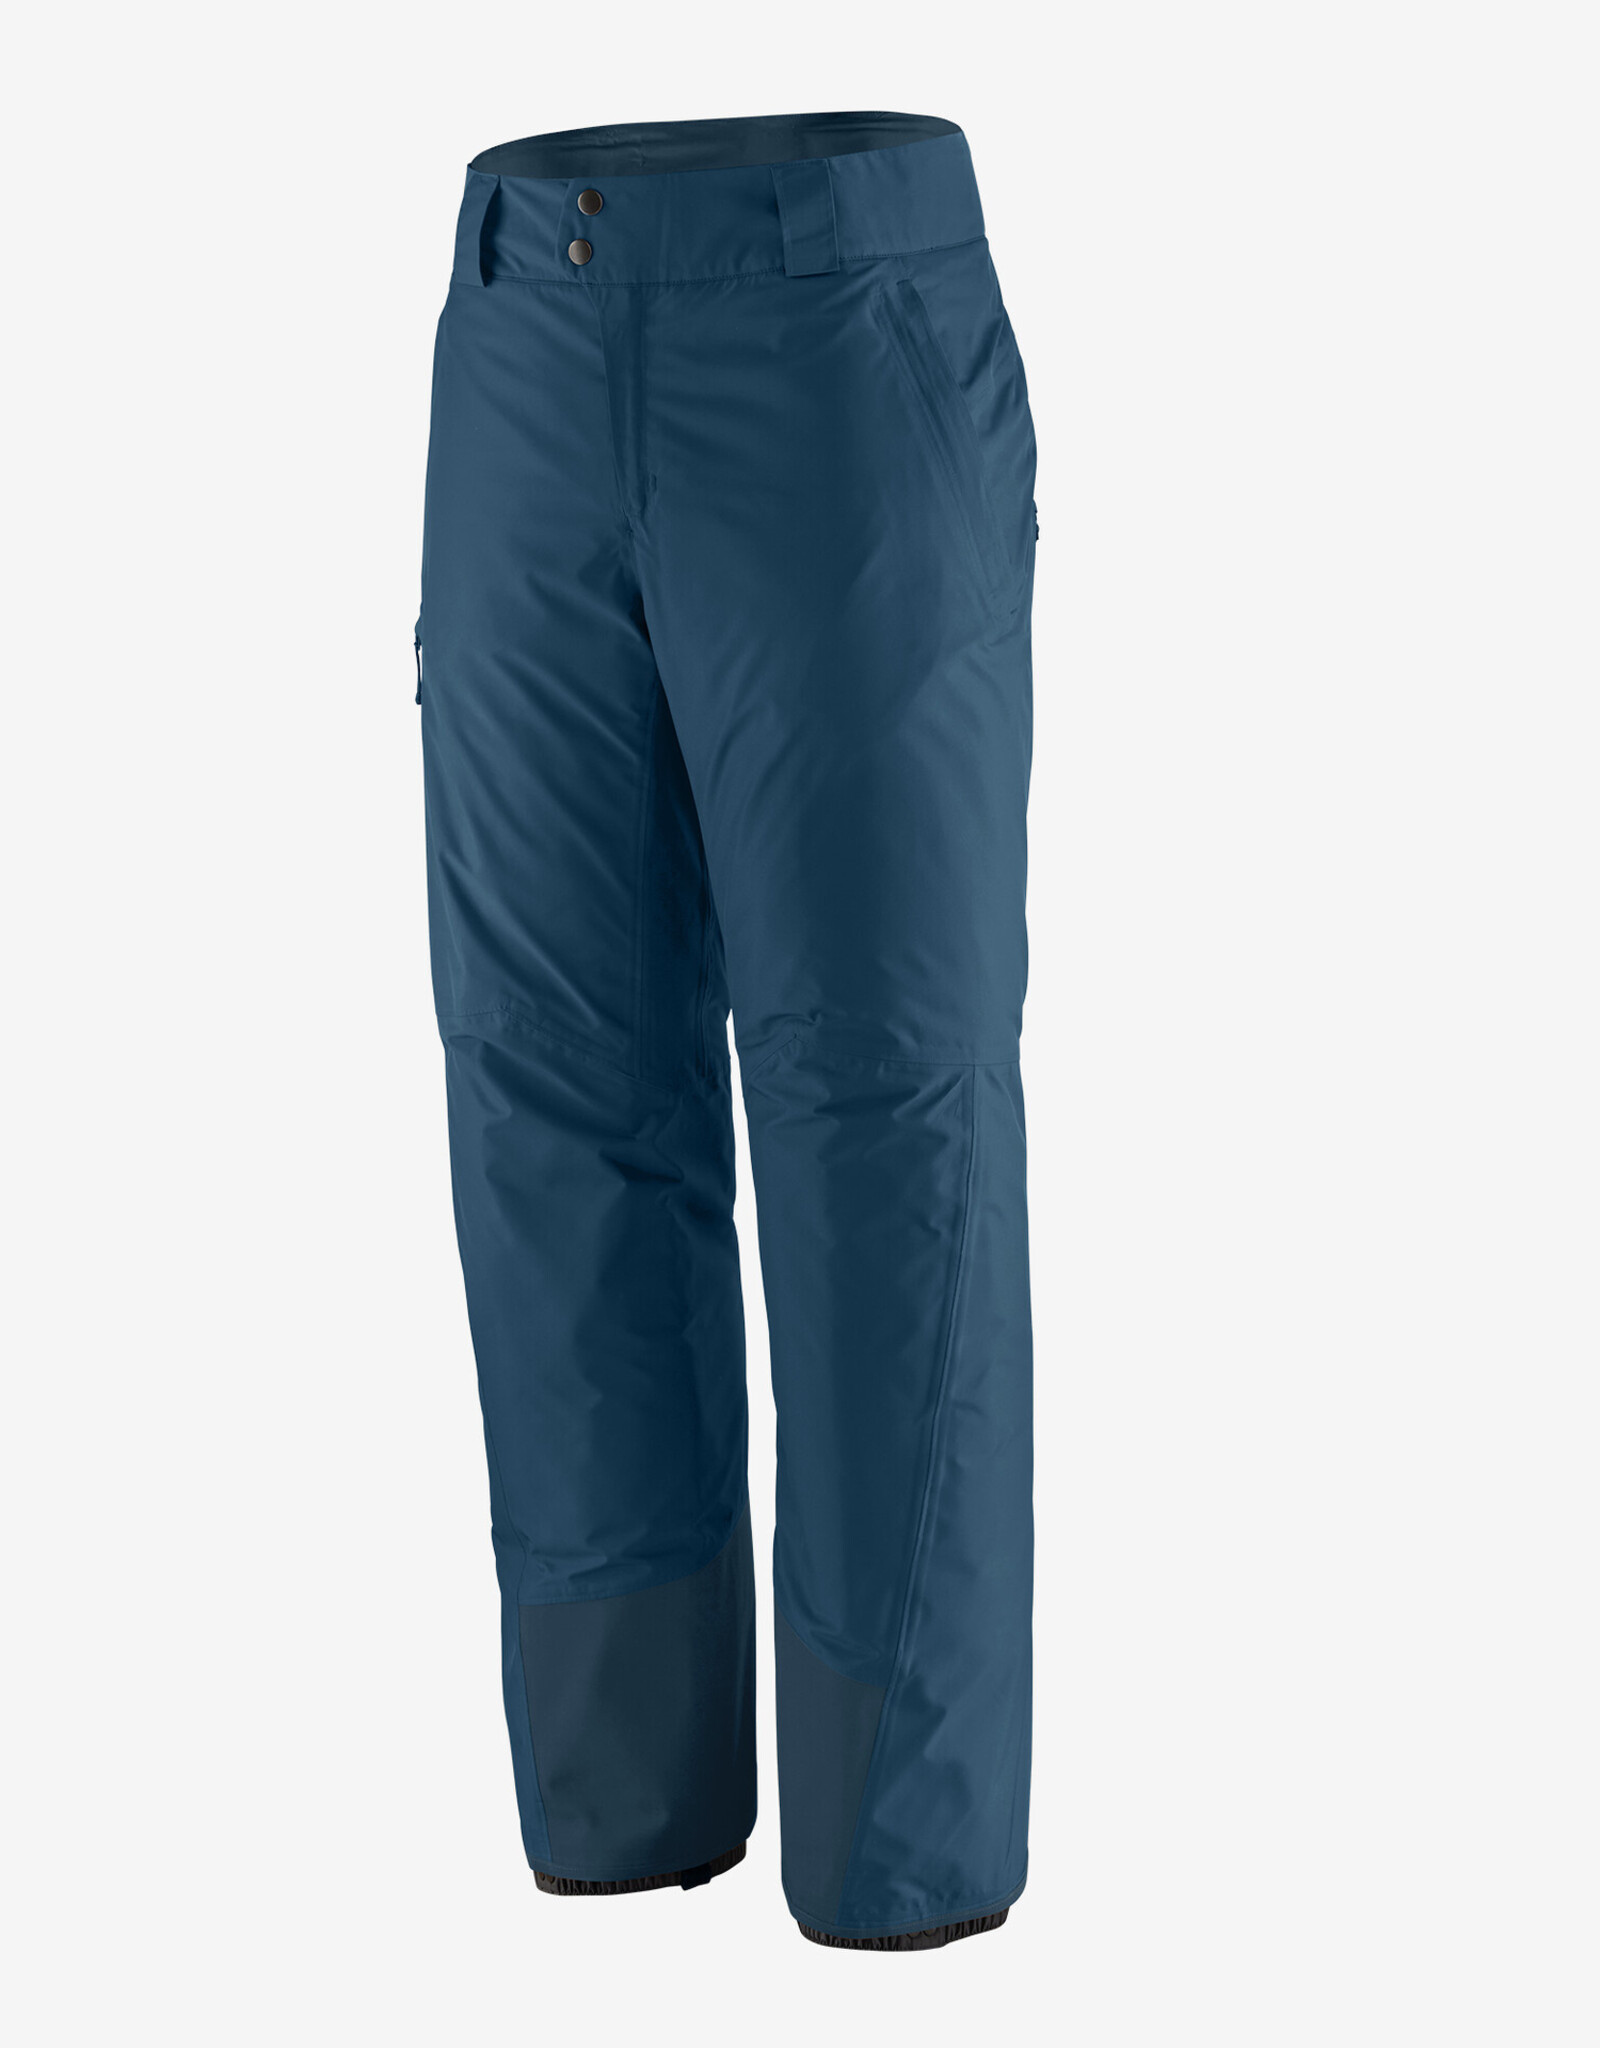 patagonia m's insulated powder town pants